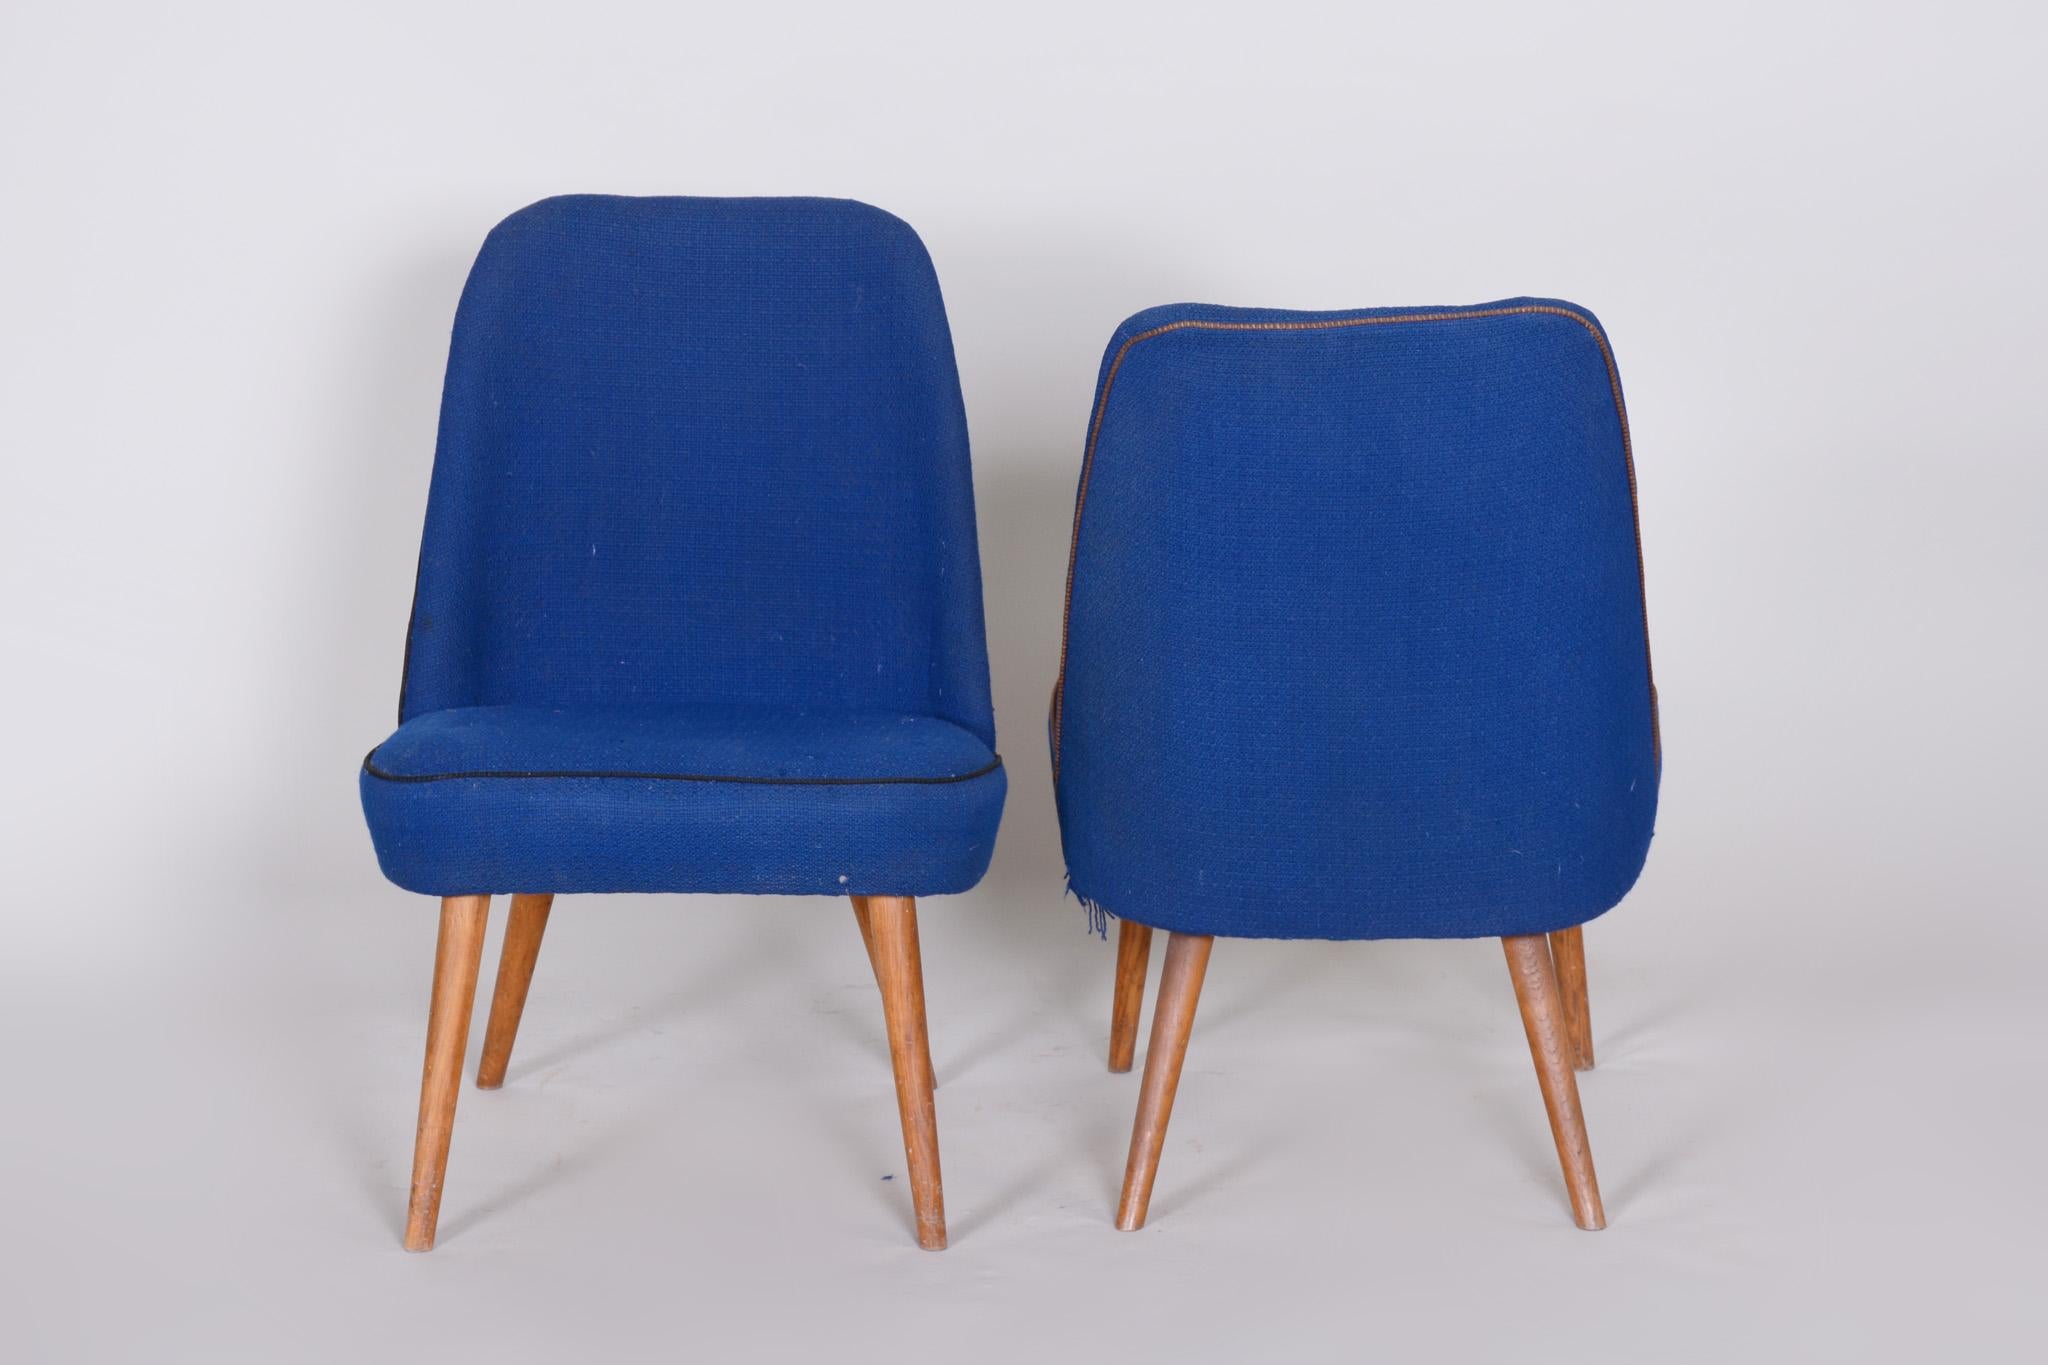 Set of 2 Blue Mid Century Armchairs, Made in 1950s Czechia. Ash, Original In Fair Condition For Sale In Horomerice, CZ